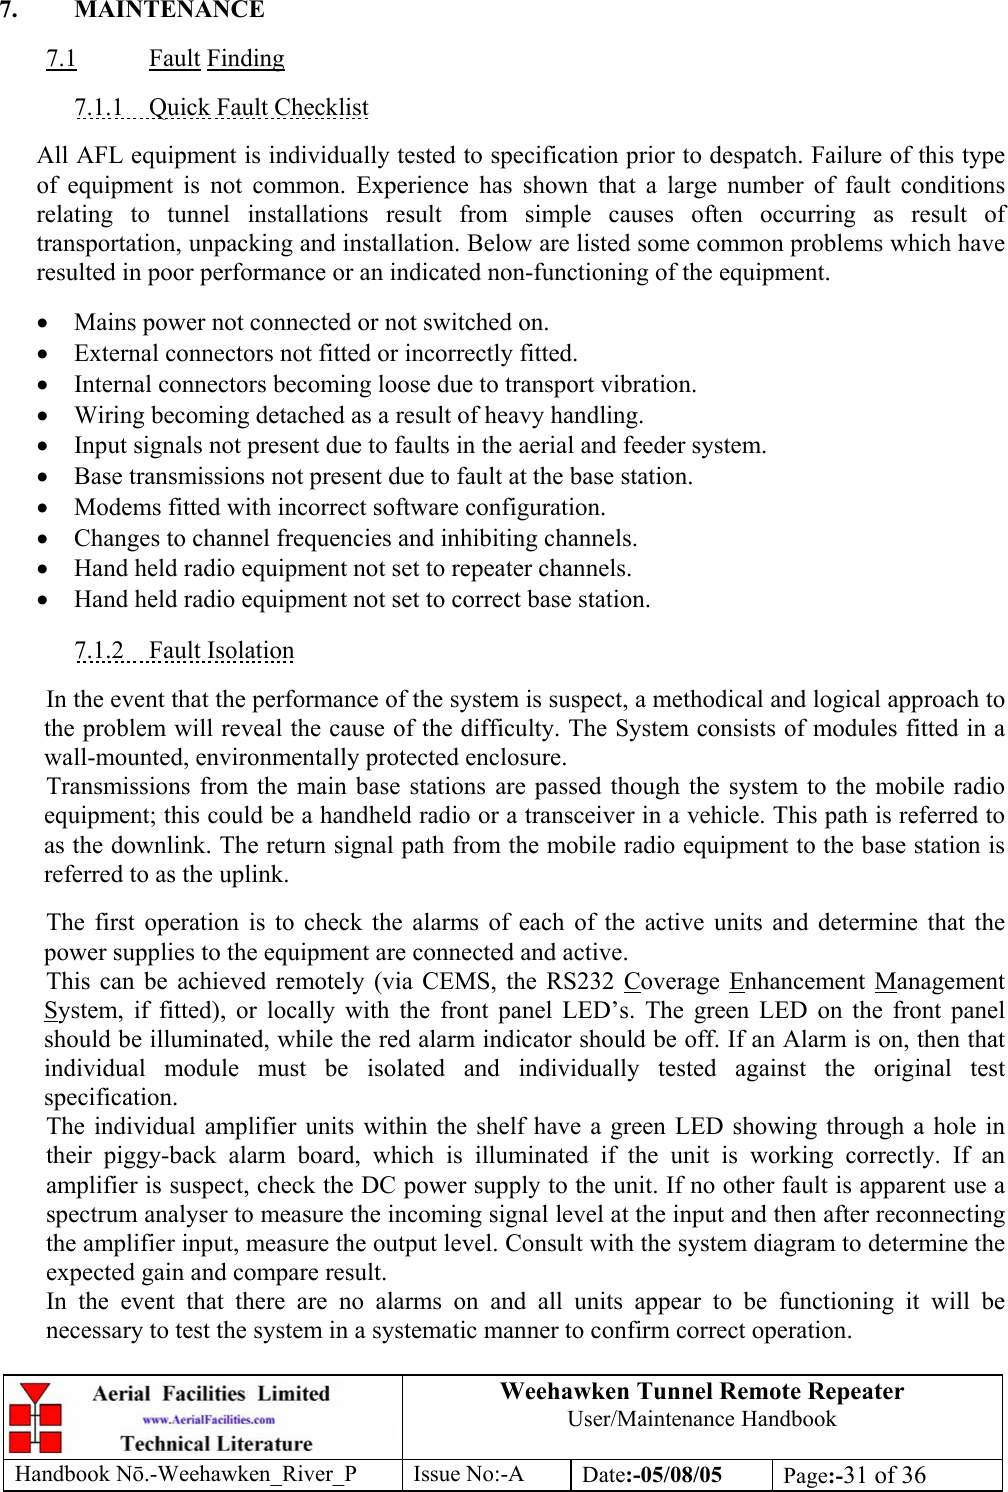 Weehawken Tunnel Remote Repeater User/Maintenance Handbook Handbook Nō.-Weehawken_River_P Issue No:-A Date:-05/08/05  Page:-31 of 36   7. MAINTENANCE  7.1 Fault Finding  7.1.1  Quick Fault Checklist  All AFL equipment is individually tested to specification prior to despatch. Failure of this type of equipment is not common. Experience has shown that a large number of fault conditions relating to tunnel installations result from simple causes often occurring as result of transportation, unpacking and installation. Below are listed some common problems which have resulted in poor performance or an indicated non-functioning of the equipment.  • Mains power not connected or not switched on. • External connectors not fitted or incorrectly fitted. • Internal connectors becoming loose due to transport vibration. • Wiring becoming detached as a result of heavy handling. • Input signals not present due to faults in the aerial and feeder system. • Base transmissions not present due to fault at the base station. • Modems fitted with incorrect software configuration. • Changes to channel frequencies and inhibiting channels. • Hand held radio equipment not set to repeater channels. • Hand held radio equipment not set to correct base station.  7.1.2 Fault Isolation  In the event that the performance of the system is suspect, a methodical and logical approach to the problem will reveal the cause of the difficulty. The System consists of modules fitted in a wall-mounted, environmentally protected enclosure. Transmissions from the main base stations are passed though the system to the mobile radio equipment; this could be a handheld radio or a transceiver in a vehicle. This path is referred to as the downlink. The return signal path from the mobile radio equipment to the base station is referred to as the uplink.  The first operation is to check the alarms of each of the active units and determine that the power supplies to the equipment are connected and active. This can be achieved remotely (via CEMS, the RS232 Coverage Enhancement Management System, if fitted), or locally with the front panel LED’s. The green LED on the front panel should be illuminated, while the red alarm indicator should be off. If an Alarm is on, then that individual module must be isolated and individually tested against the original test specification. The individual amplifier units within the shelf have a green LED showing through a hole in their piggy-back alarm board, which is illuminated if the unit is working correctly. If an amplifier is suspect, check the DC power supply to the unit. If no other fault is apparent use a spectrum analyser to measure the incoming signal level at the input and then after reconnecting the amplifier input, measure the output level. Consult with the system diagram to determine the expected gain and compare result. In the event that there are no alarms on and all units appear to be functioning it will be necessary to test the system in a systematic manner to confirm correct operation. 